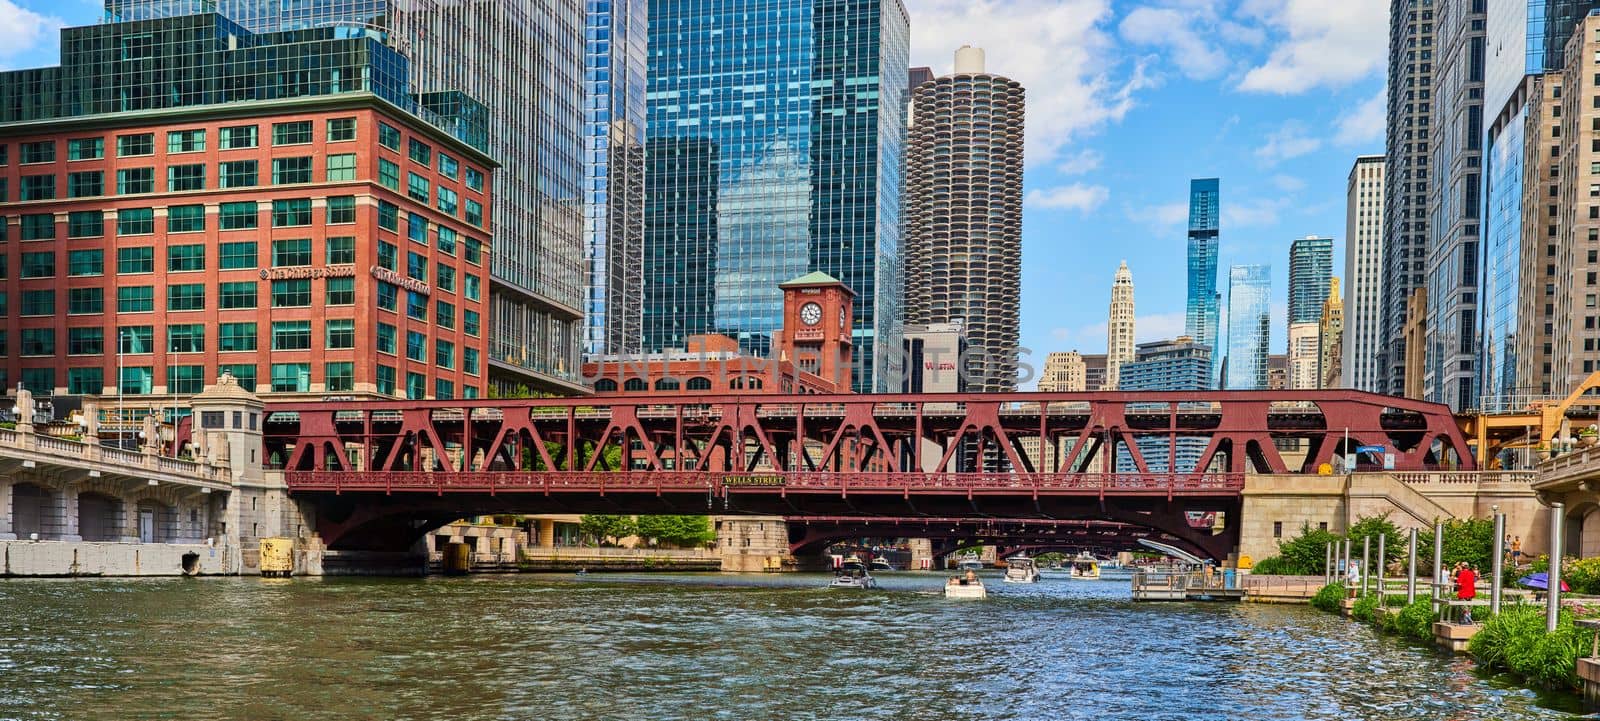 Image of Wells Street bridge going over river in Chicago with skyscrapers all around